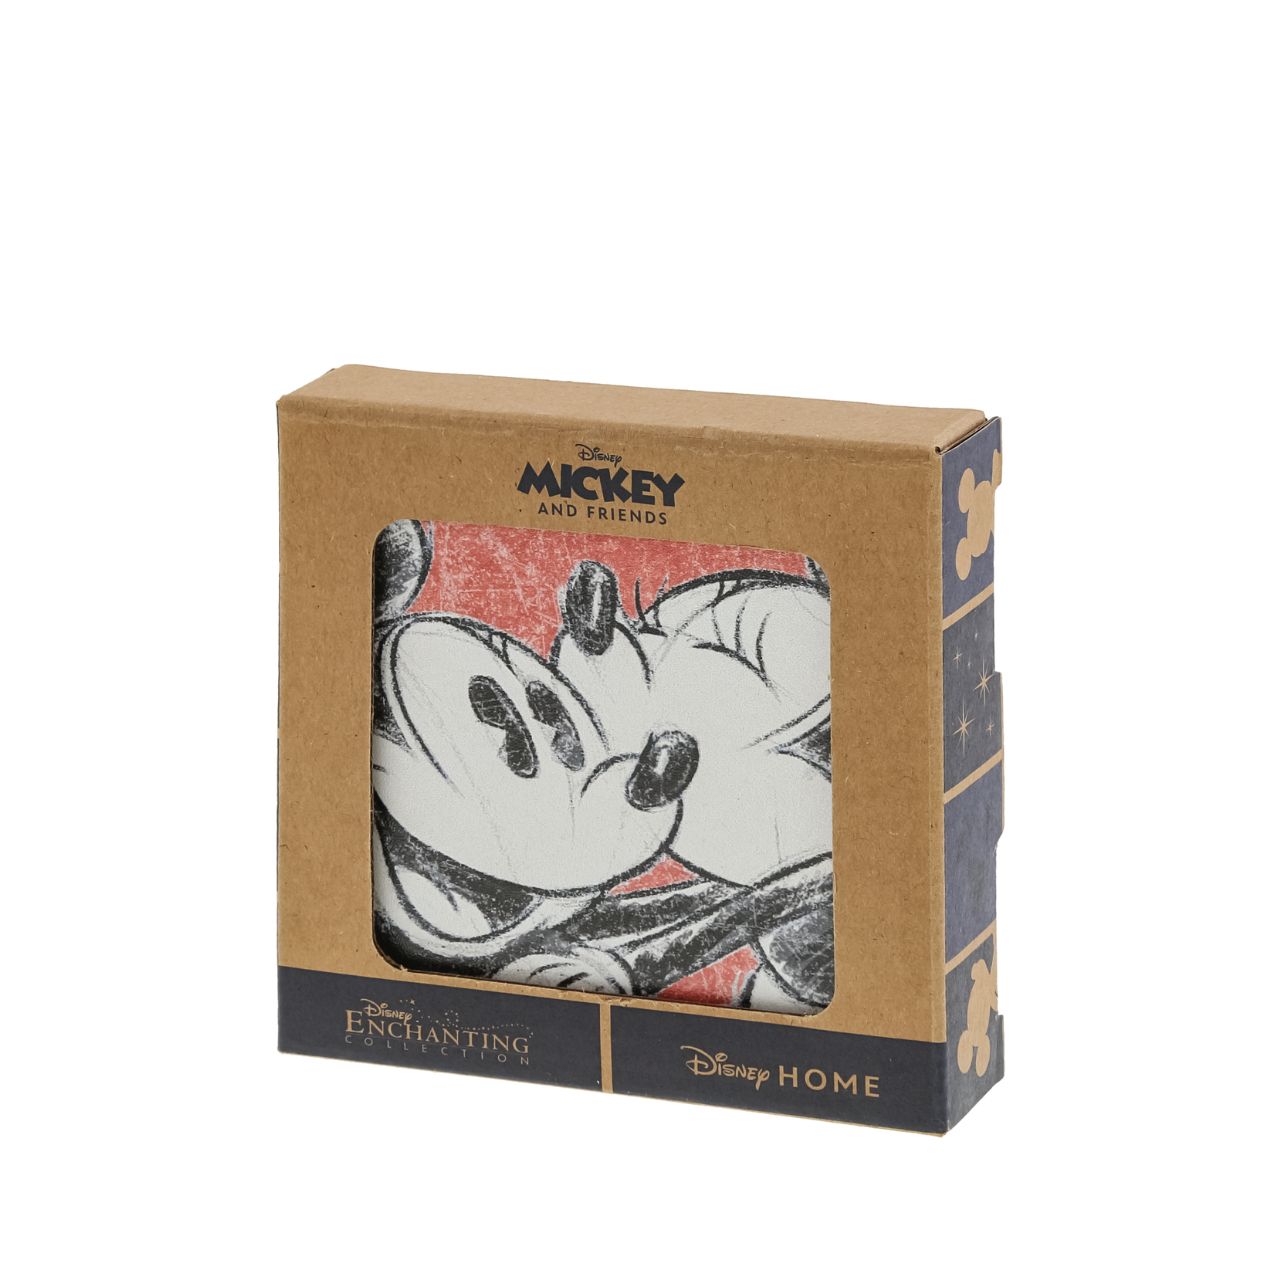 These Mickey and Minnie Mouse Coasters are the perfect addition to any home. Crafted from high-quality melamine, the set of 4 coasters are designed to last. The iconic Mickey and Minnie Mouse designs add a touch of Disney magic to your décor and are sure to make your friends and family smile.